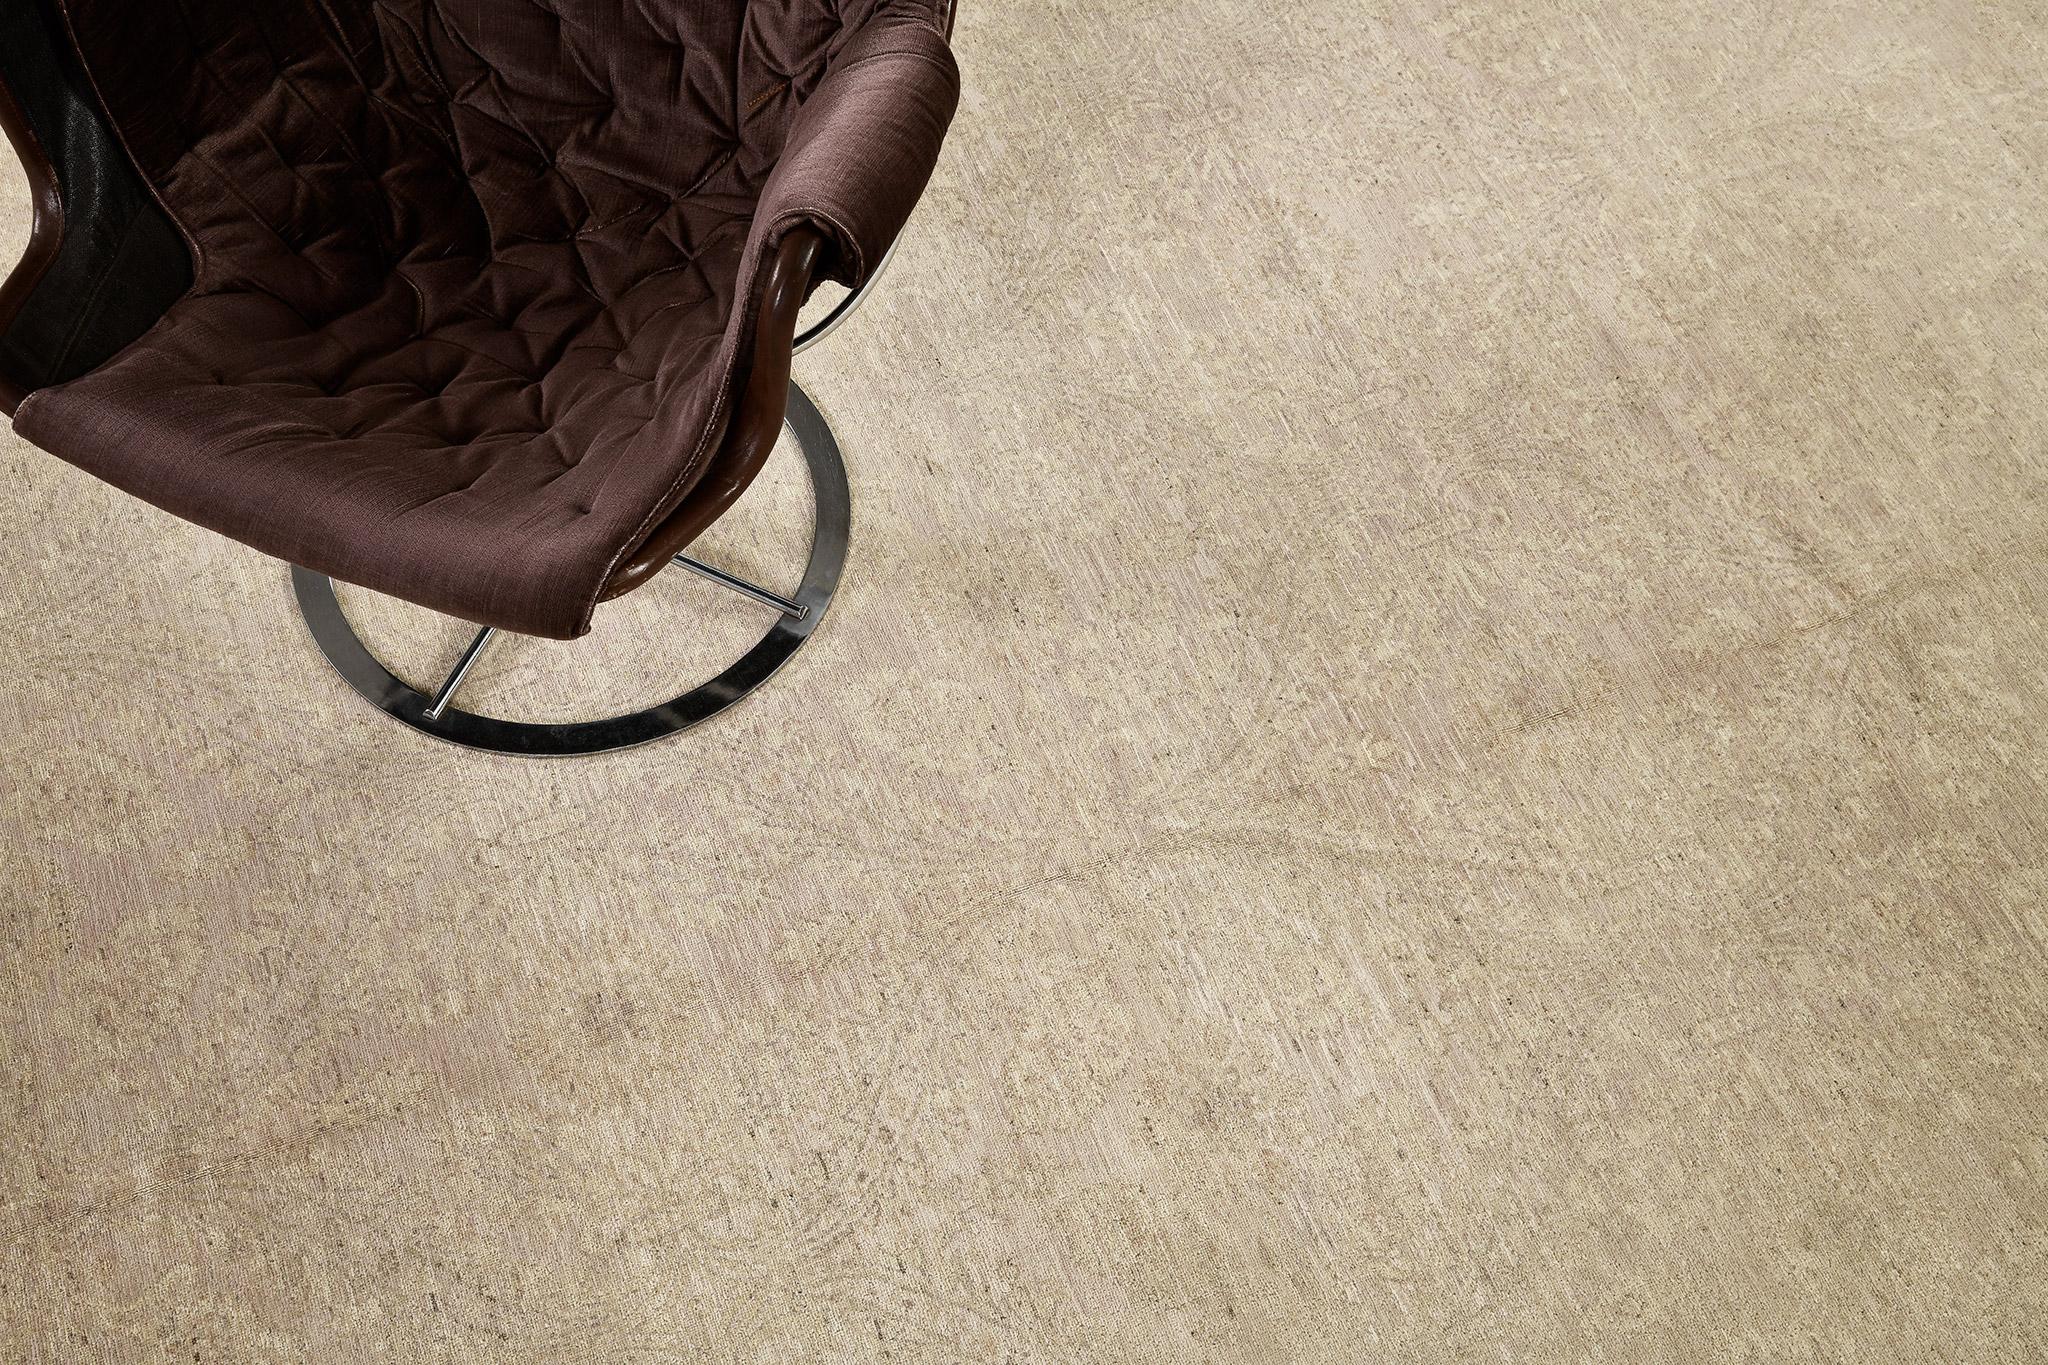 A sophisticated rug that embodies a magnificent transitional style featuring the warm tones of tan and sand. The abrashed tan field with all-over blooming palmettes and serrated leaves exudes timeless elegance. A stylish piece of art that will